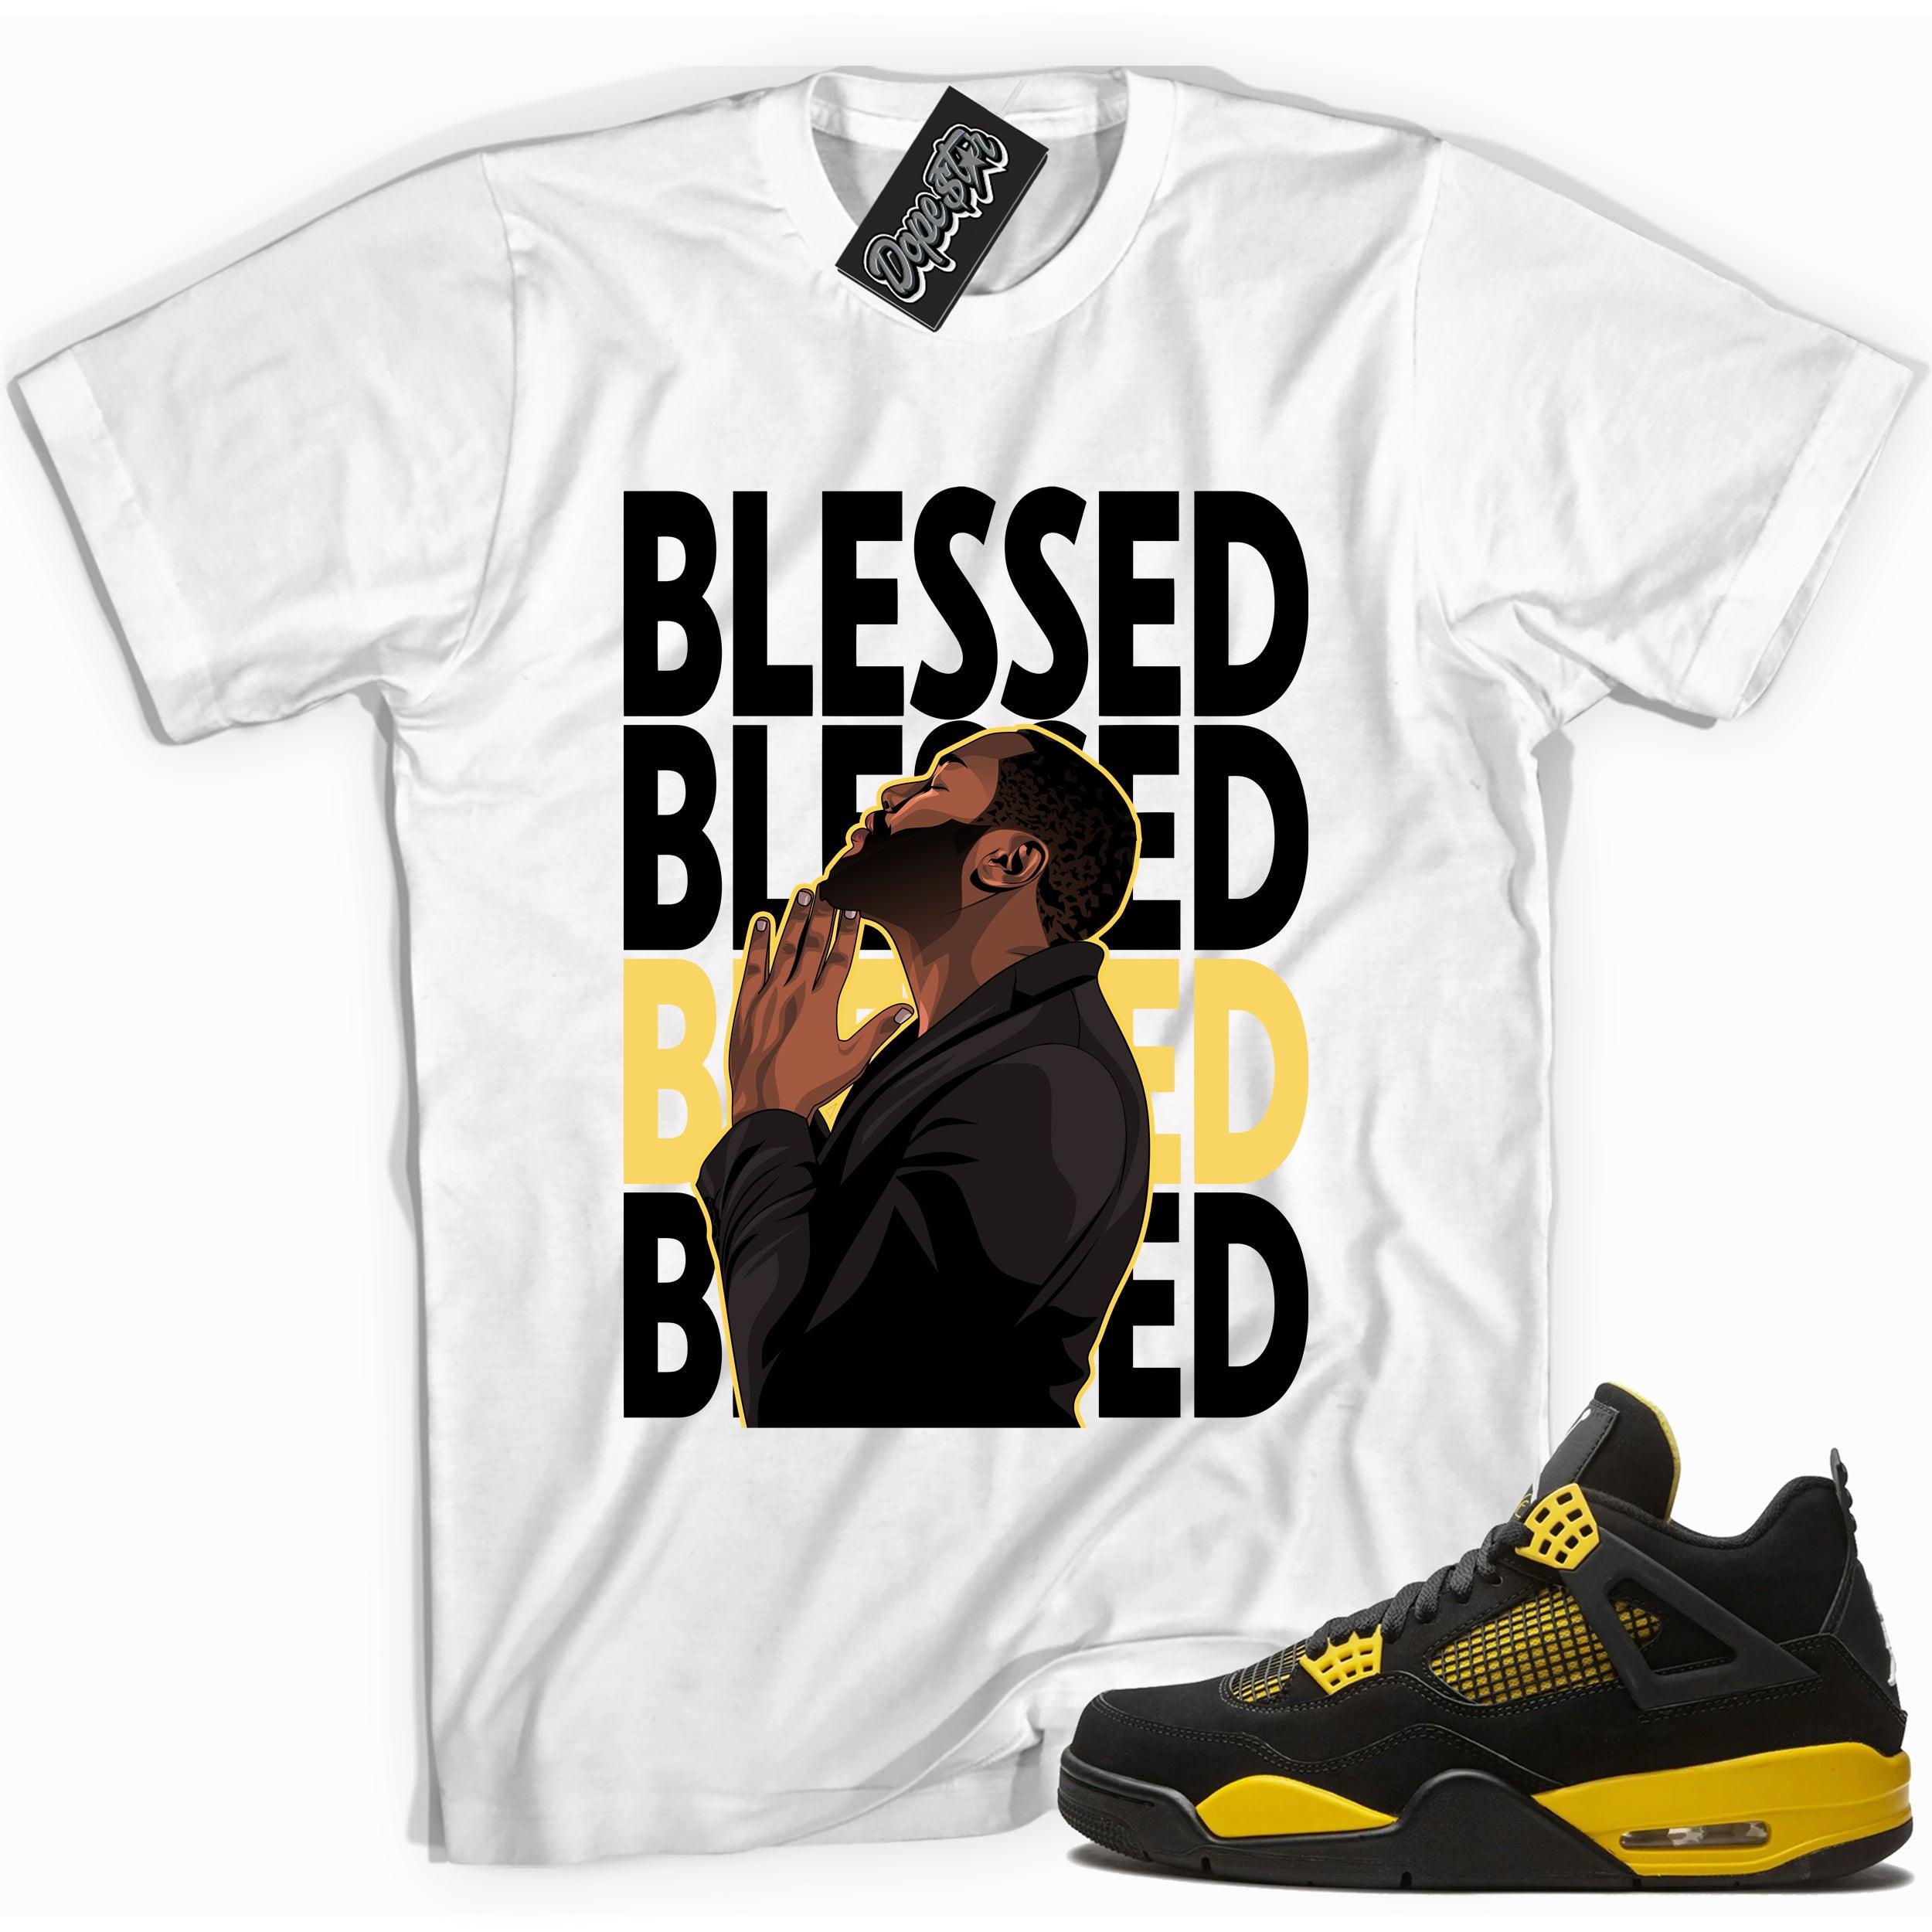 Cool white graphic tee with 'blessed king' print, that perfectly matches Air Jordan 4 Thunder sneakers